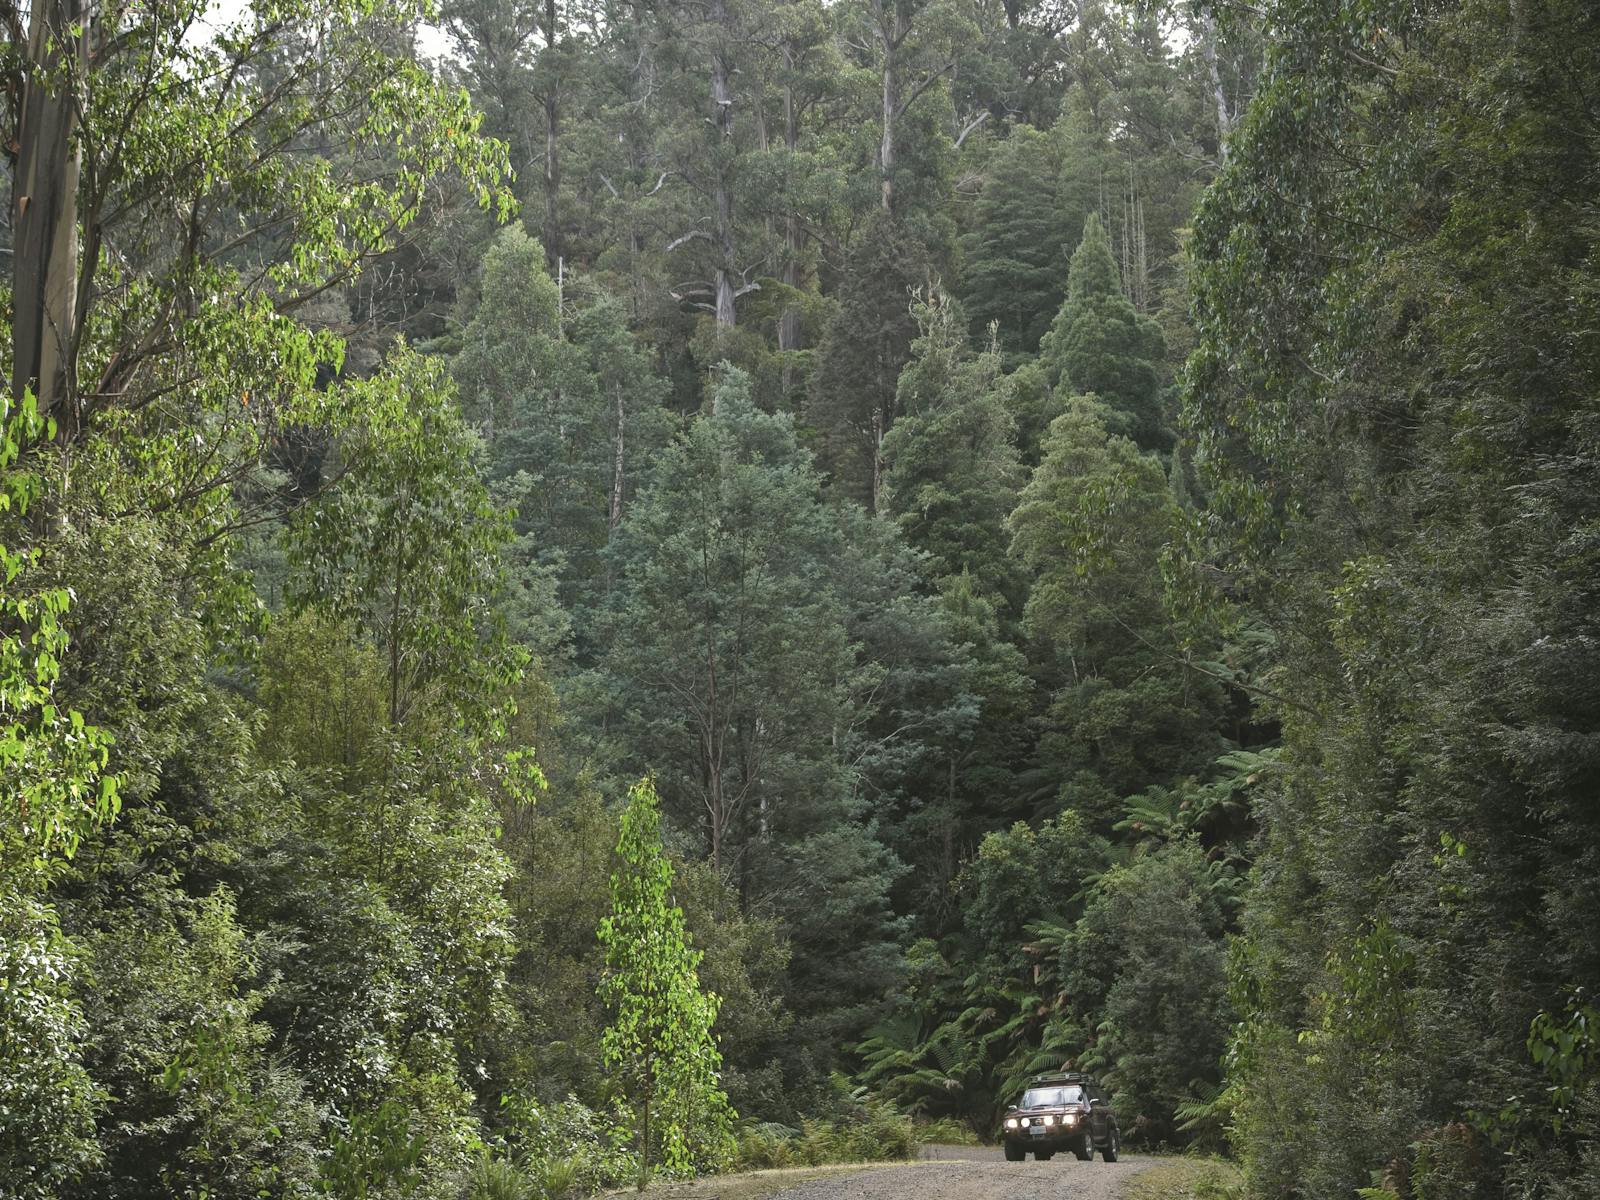 Touring the northeast Tasmania forests